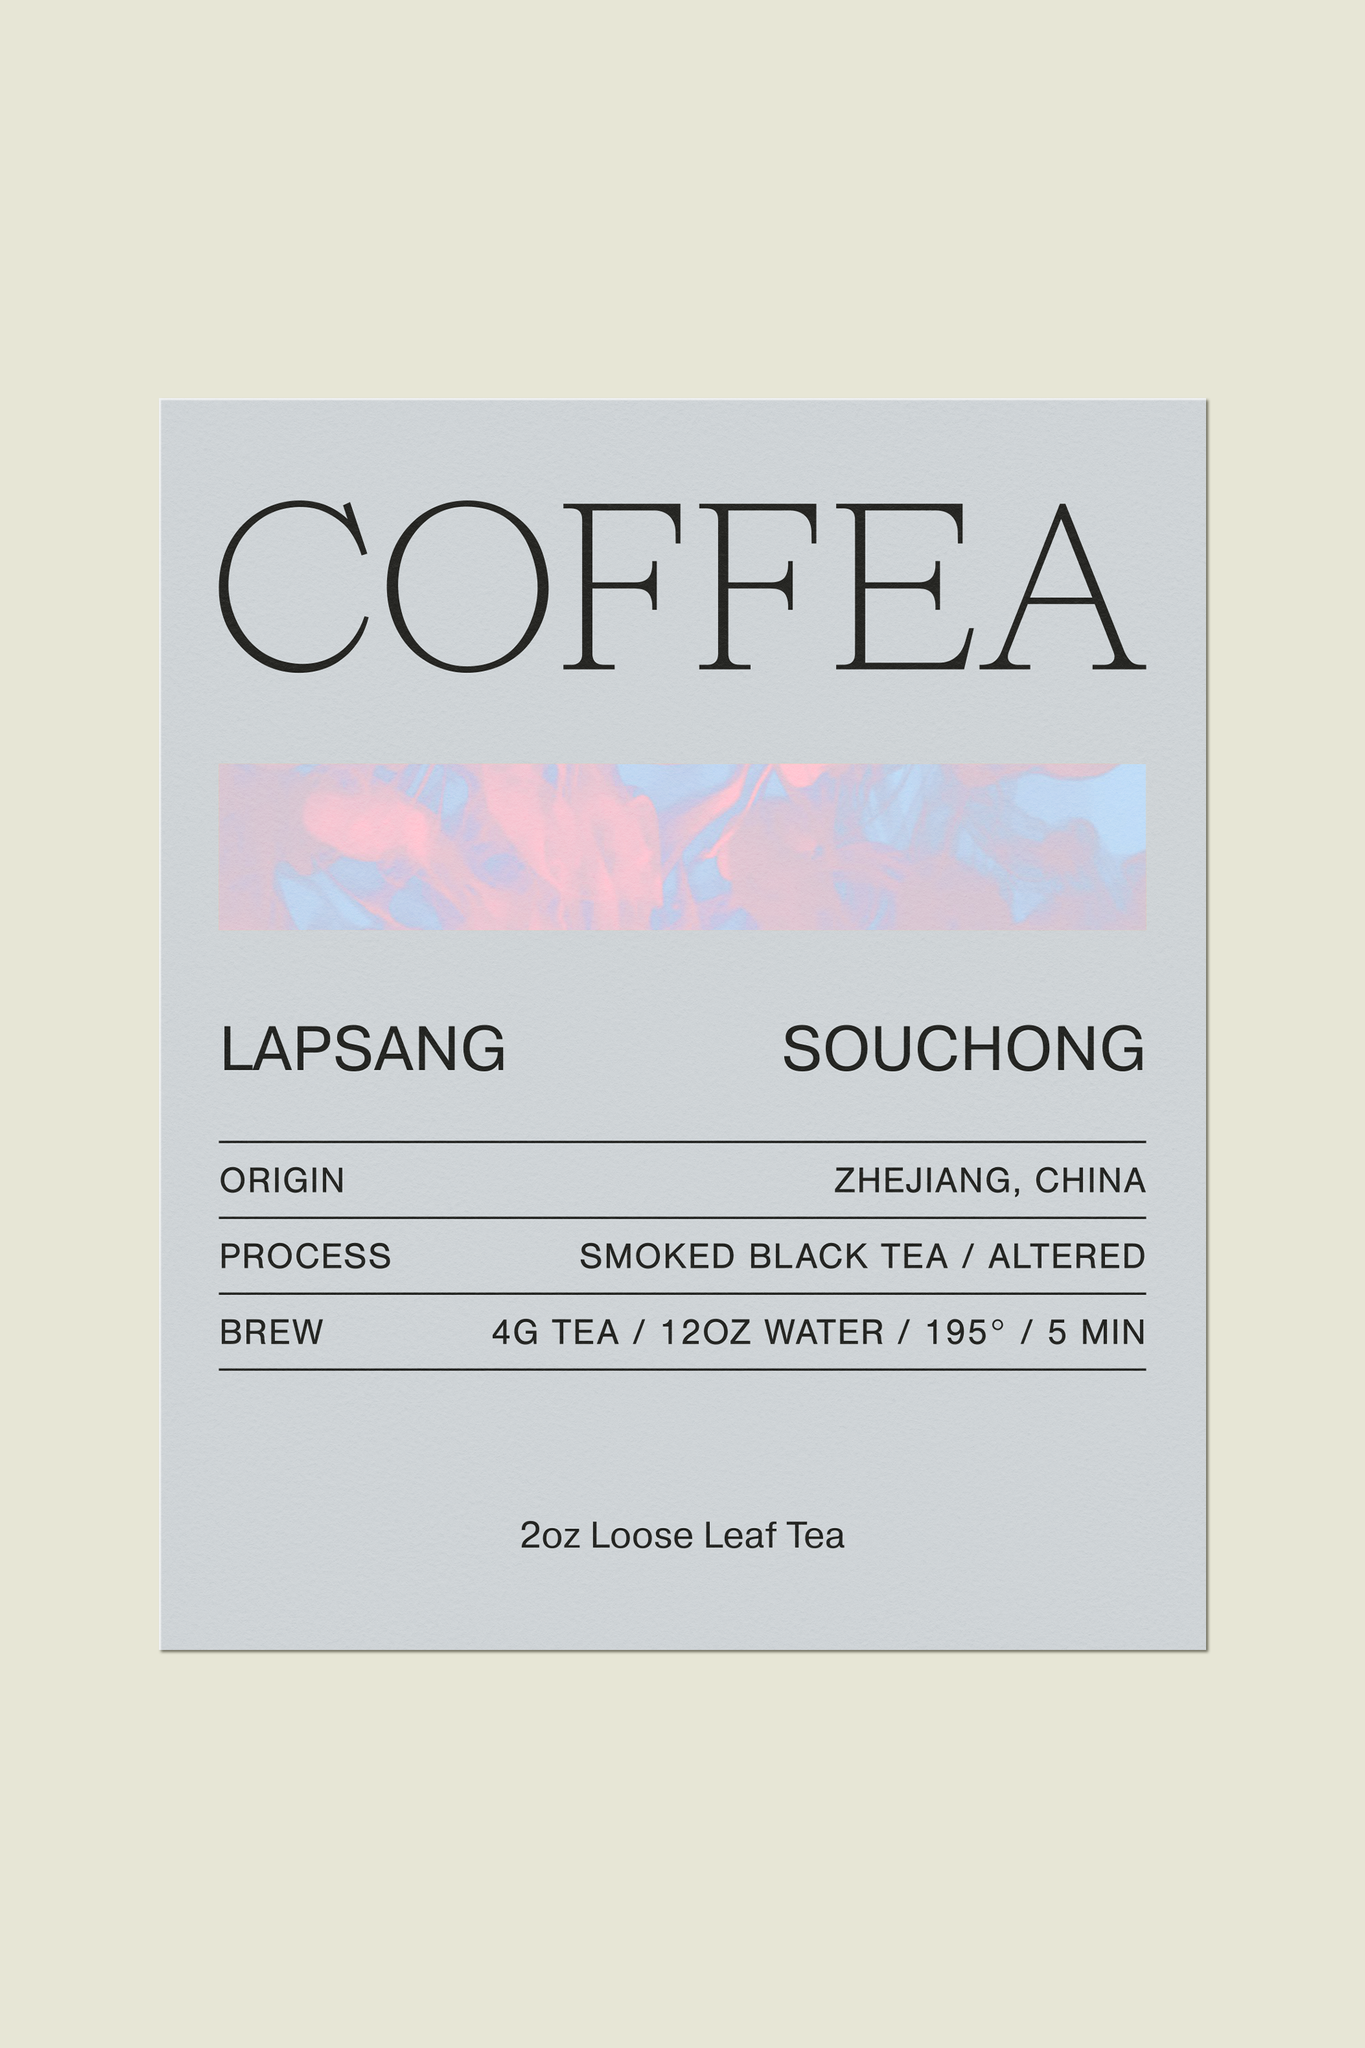 Lapsang Souchong smoked black tea from China - Coffea Roasterie